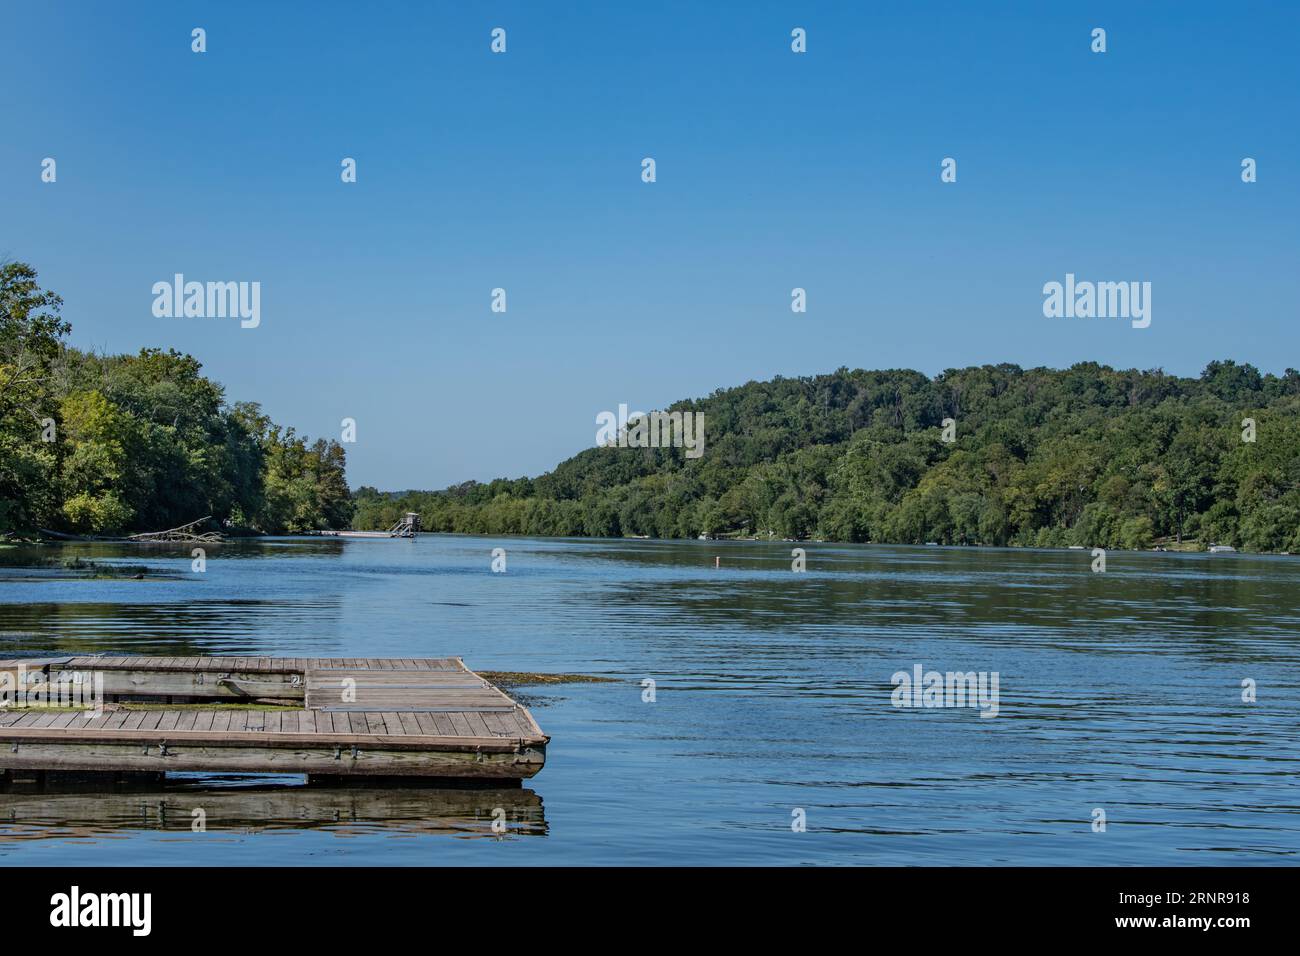 The Beautiful Susquehanna River on a Summer Afternoon, Pennsylvania USA Stock Photo